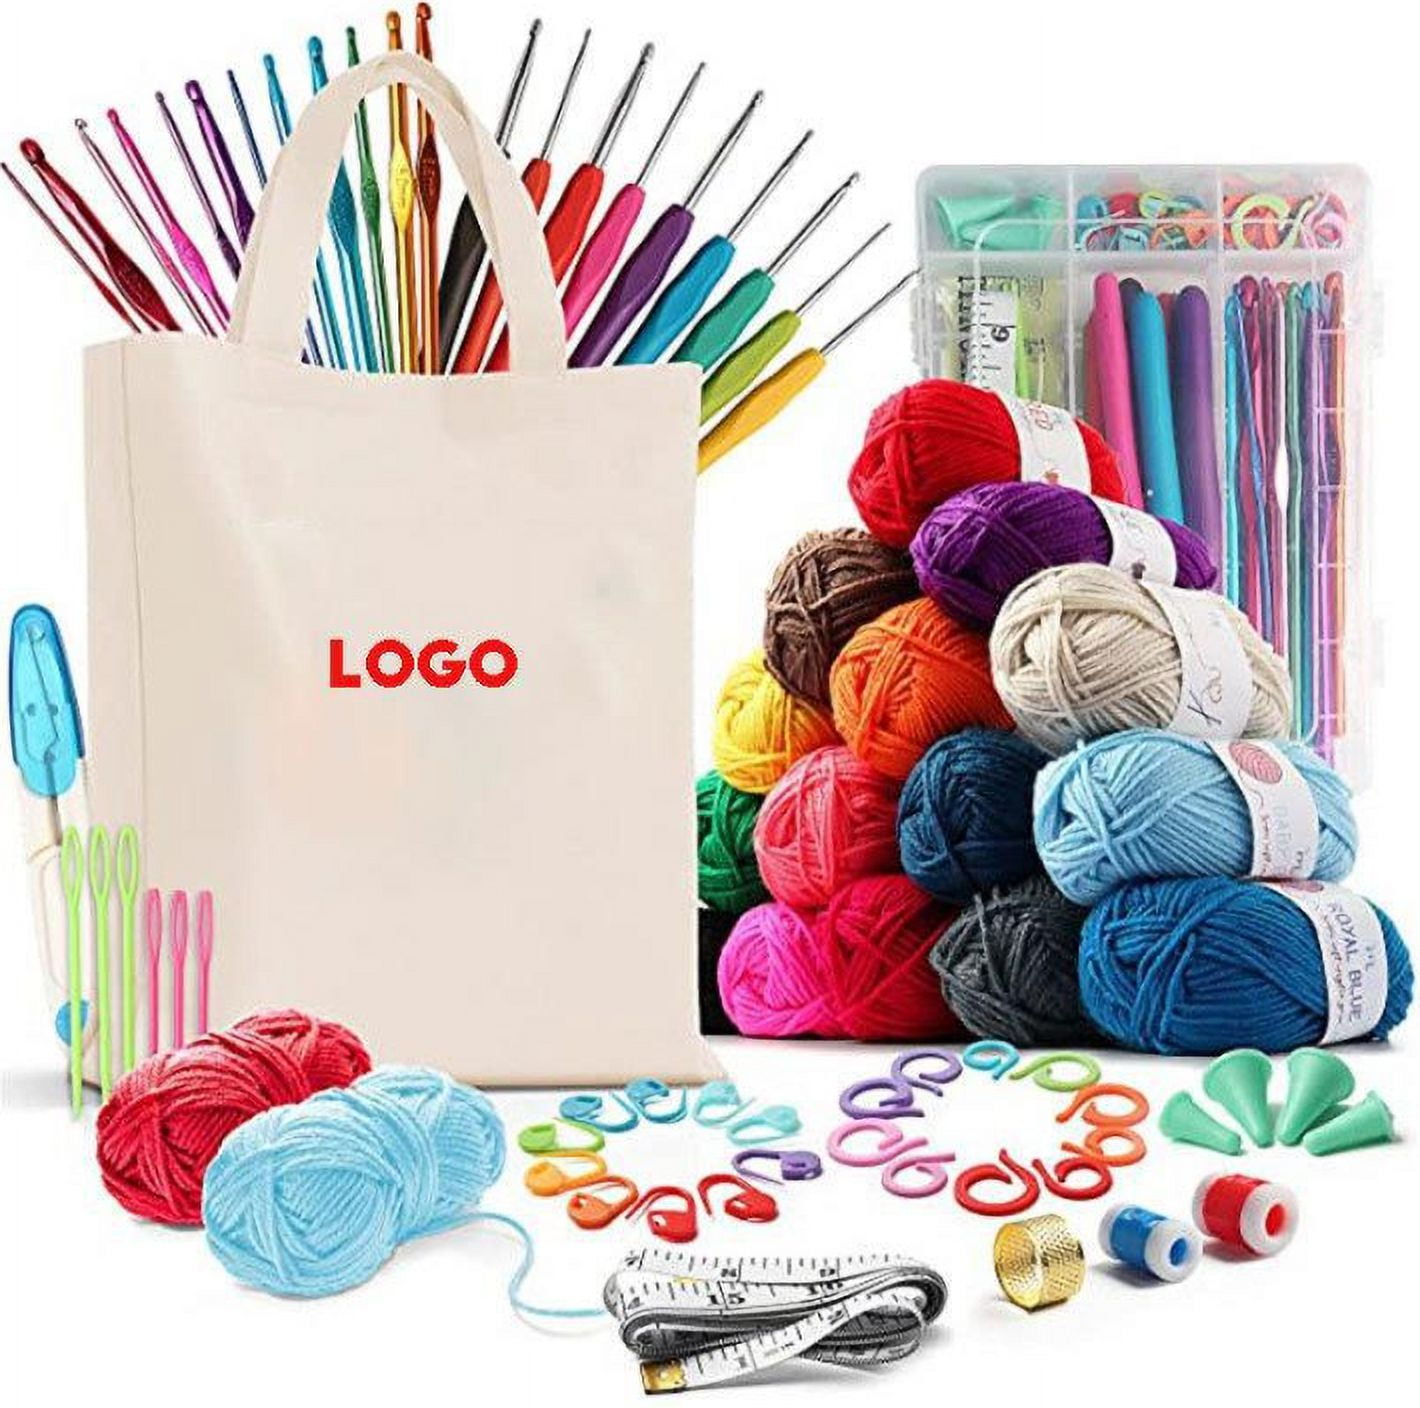 83 Piece Crochet Kit With Crochet Hooks Yarn Set - Premium Bundle Includes  Yarn Balls, Needles, Accessories Kit, Canvas Tote Bag And Lot More